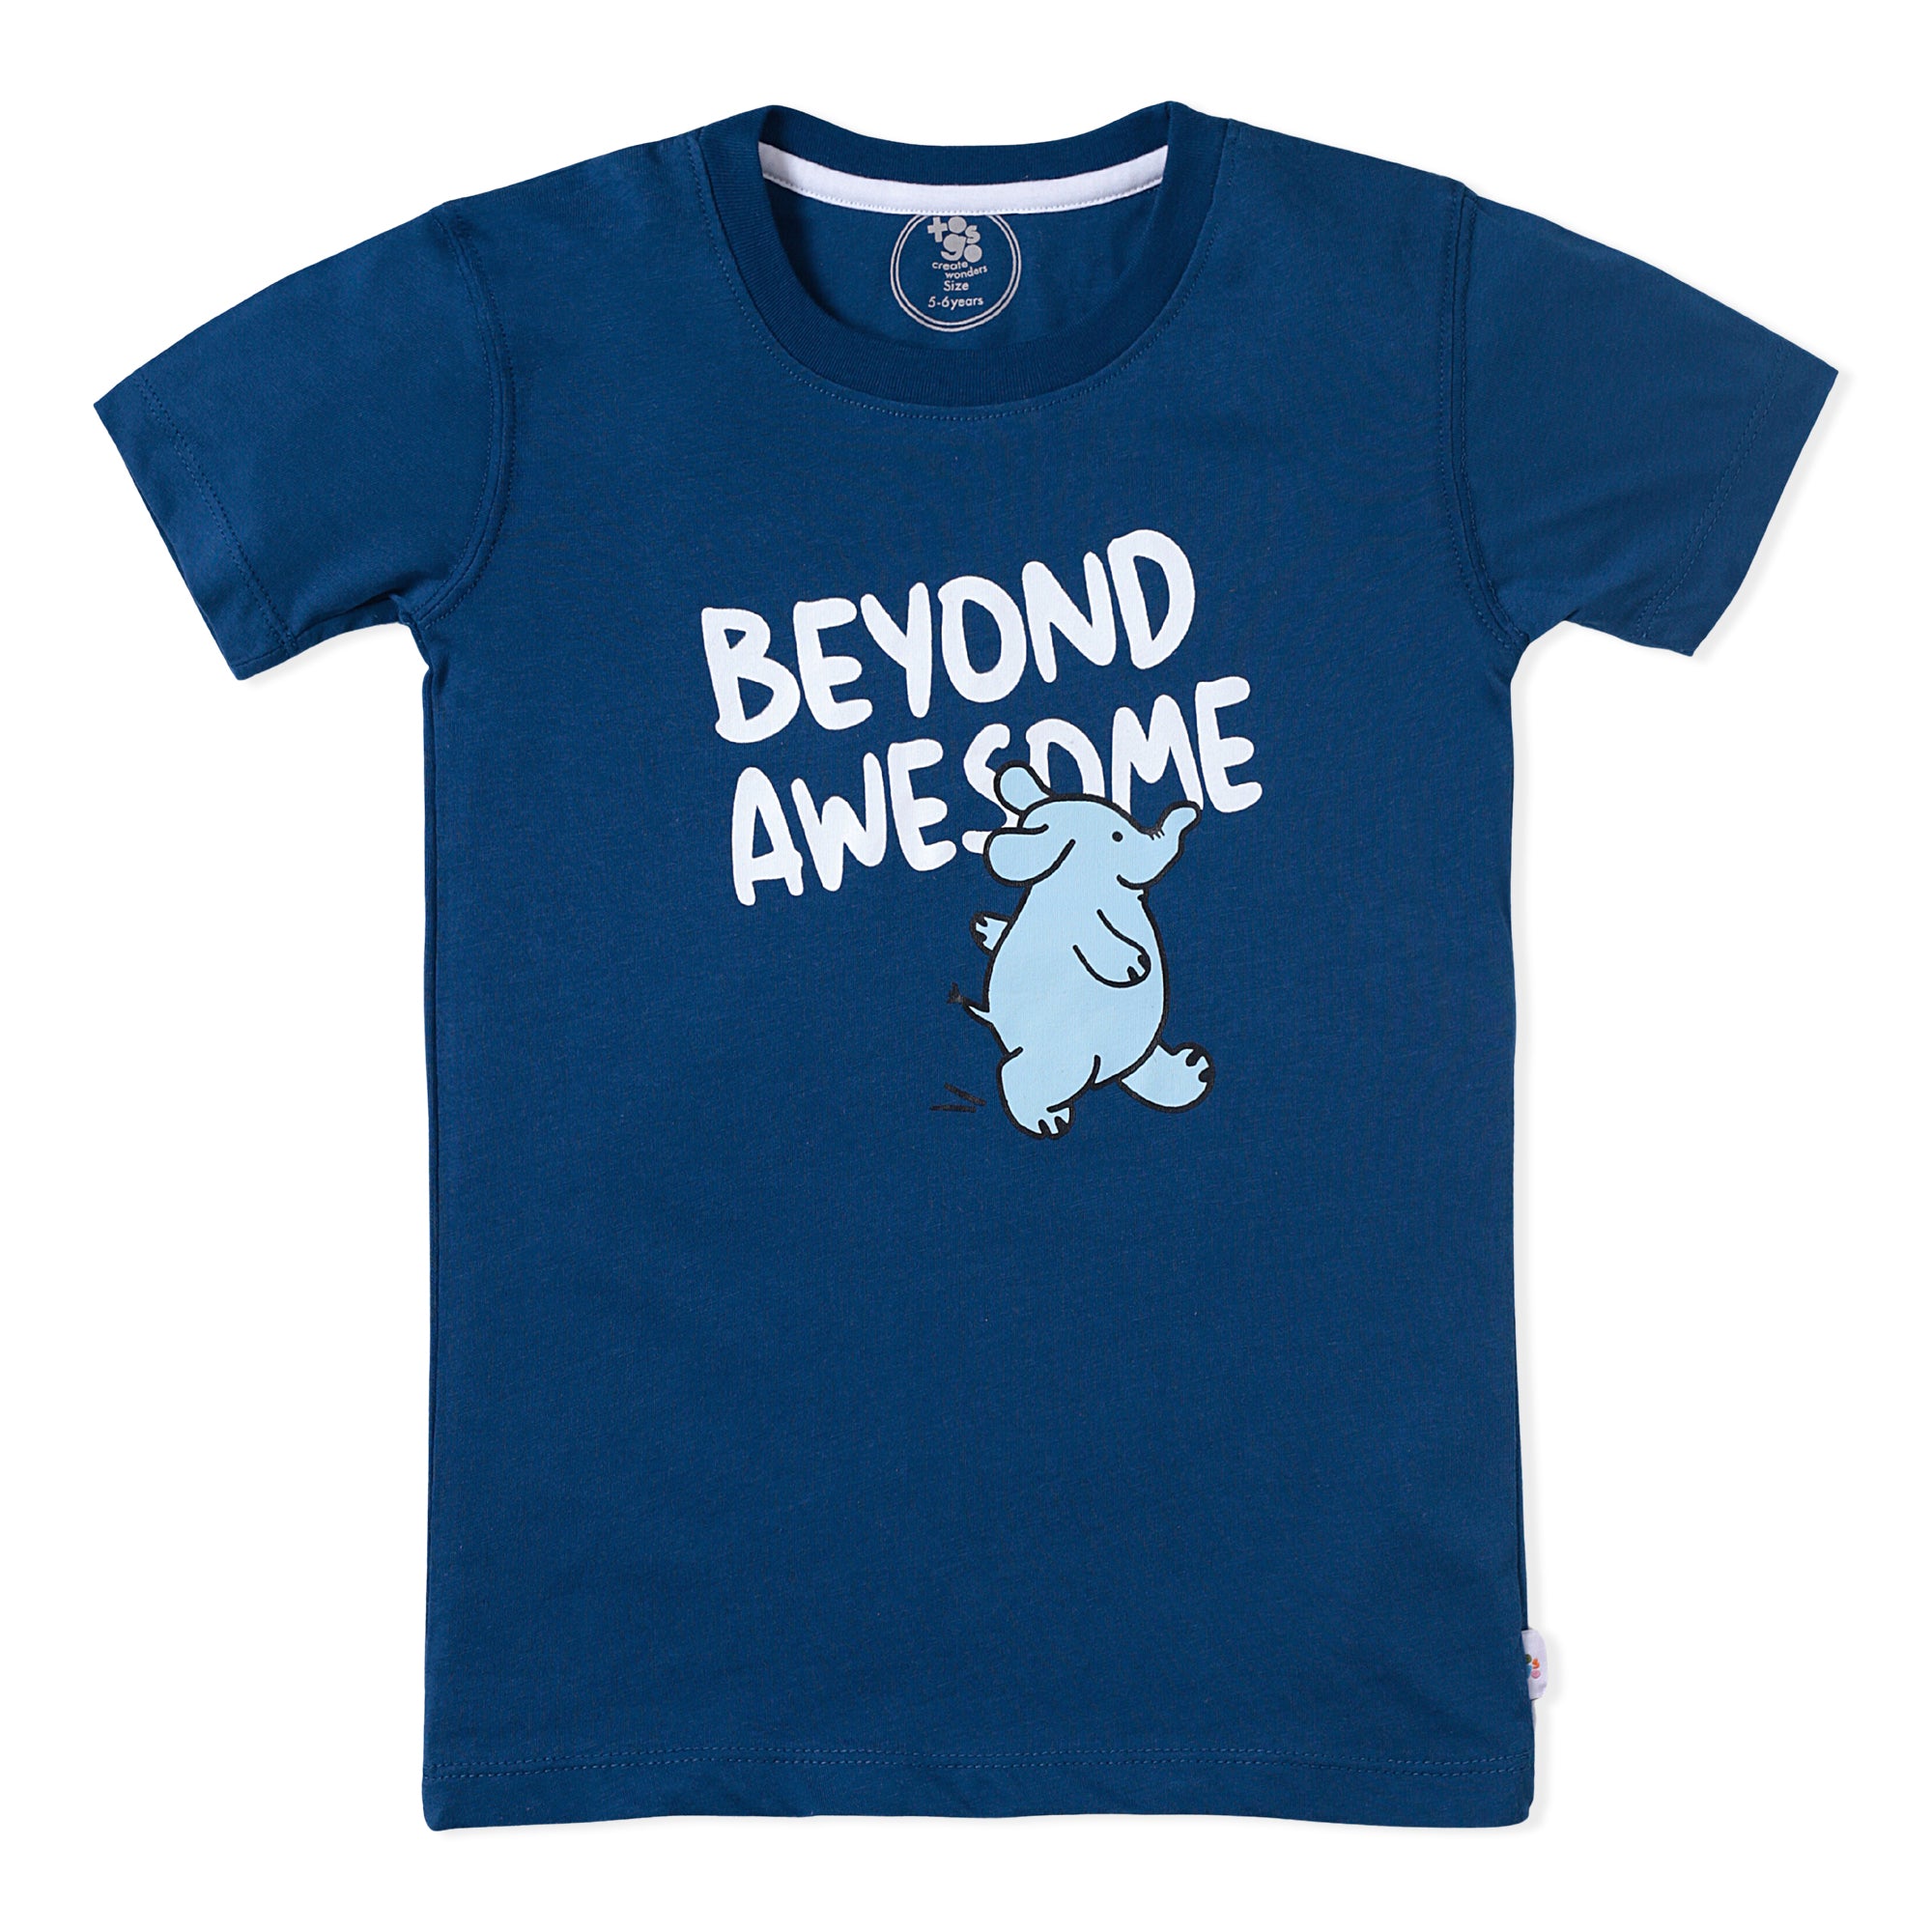 Awesome Blue Graphic T-Shirt